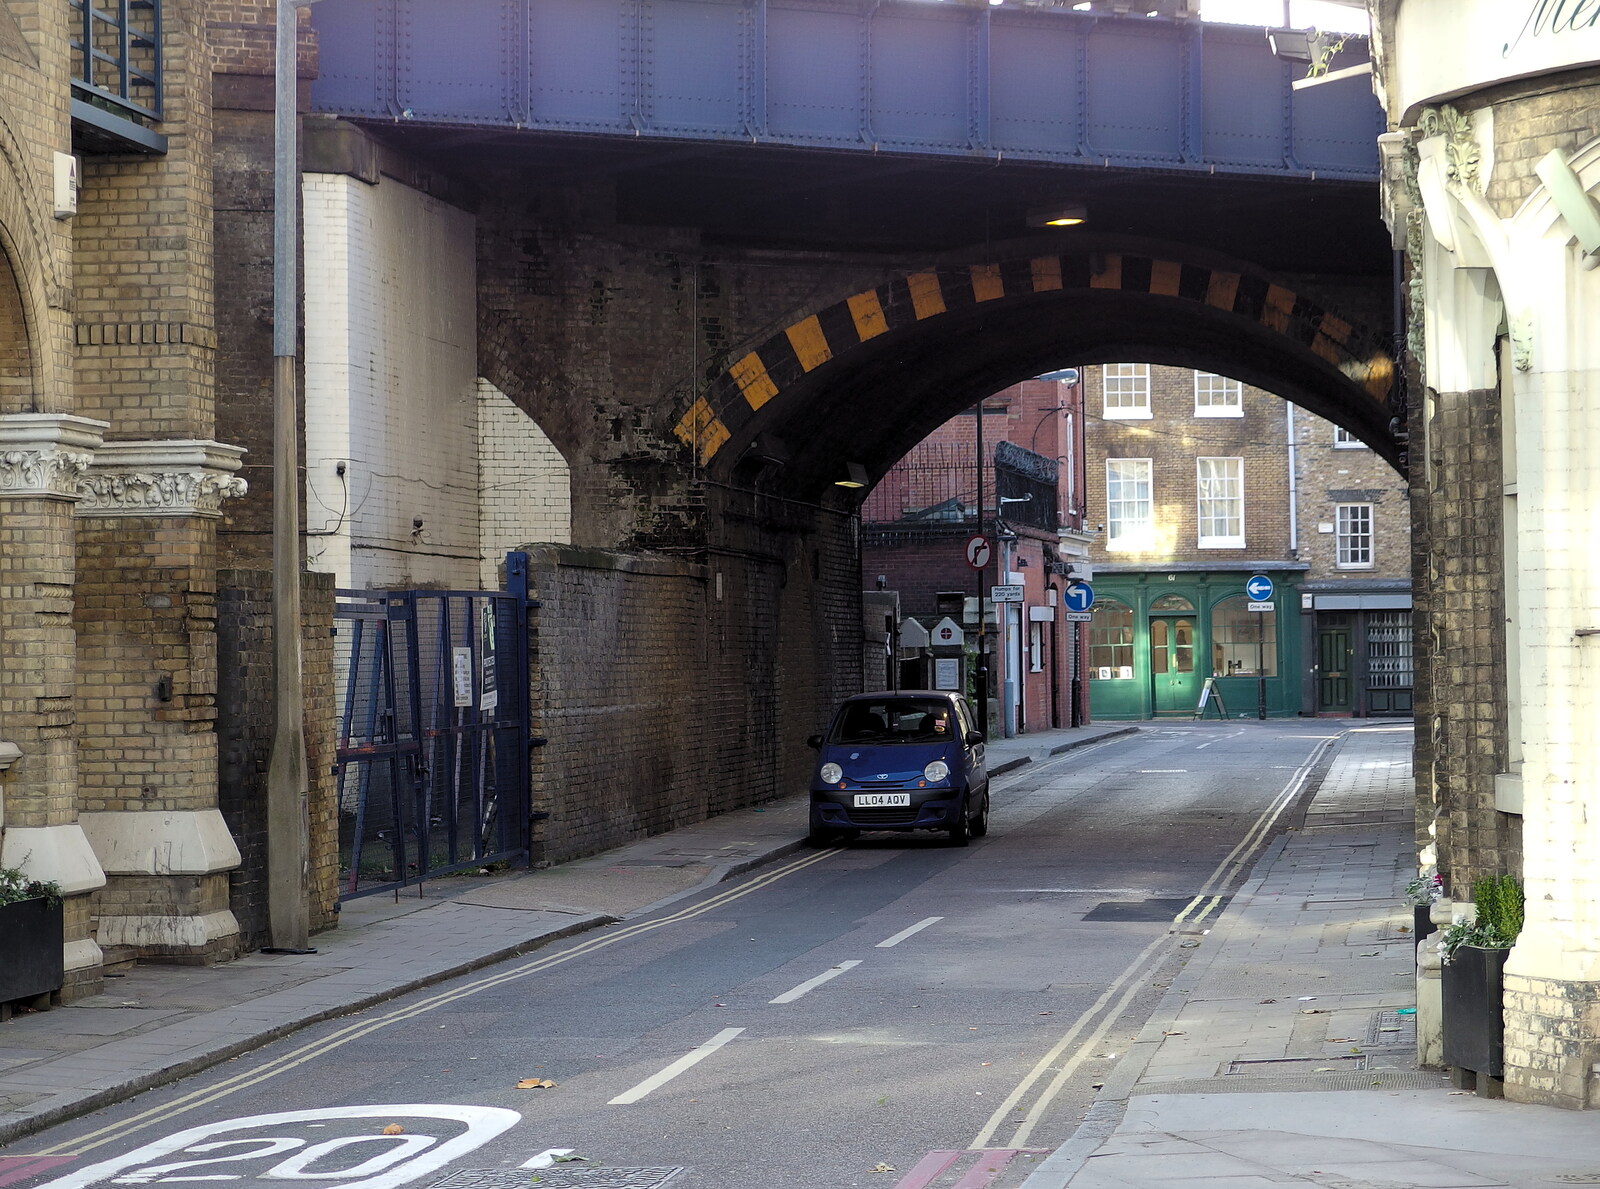 Railway bridge on O'Meara Street from SwiftKey's Arcade Cabinet, and the Streets of Southwark, London - 5th December 2013